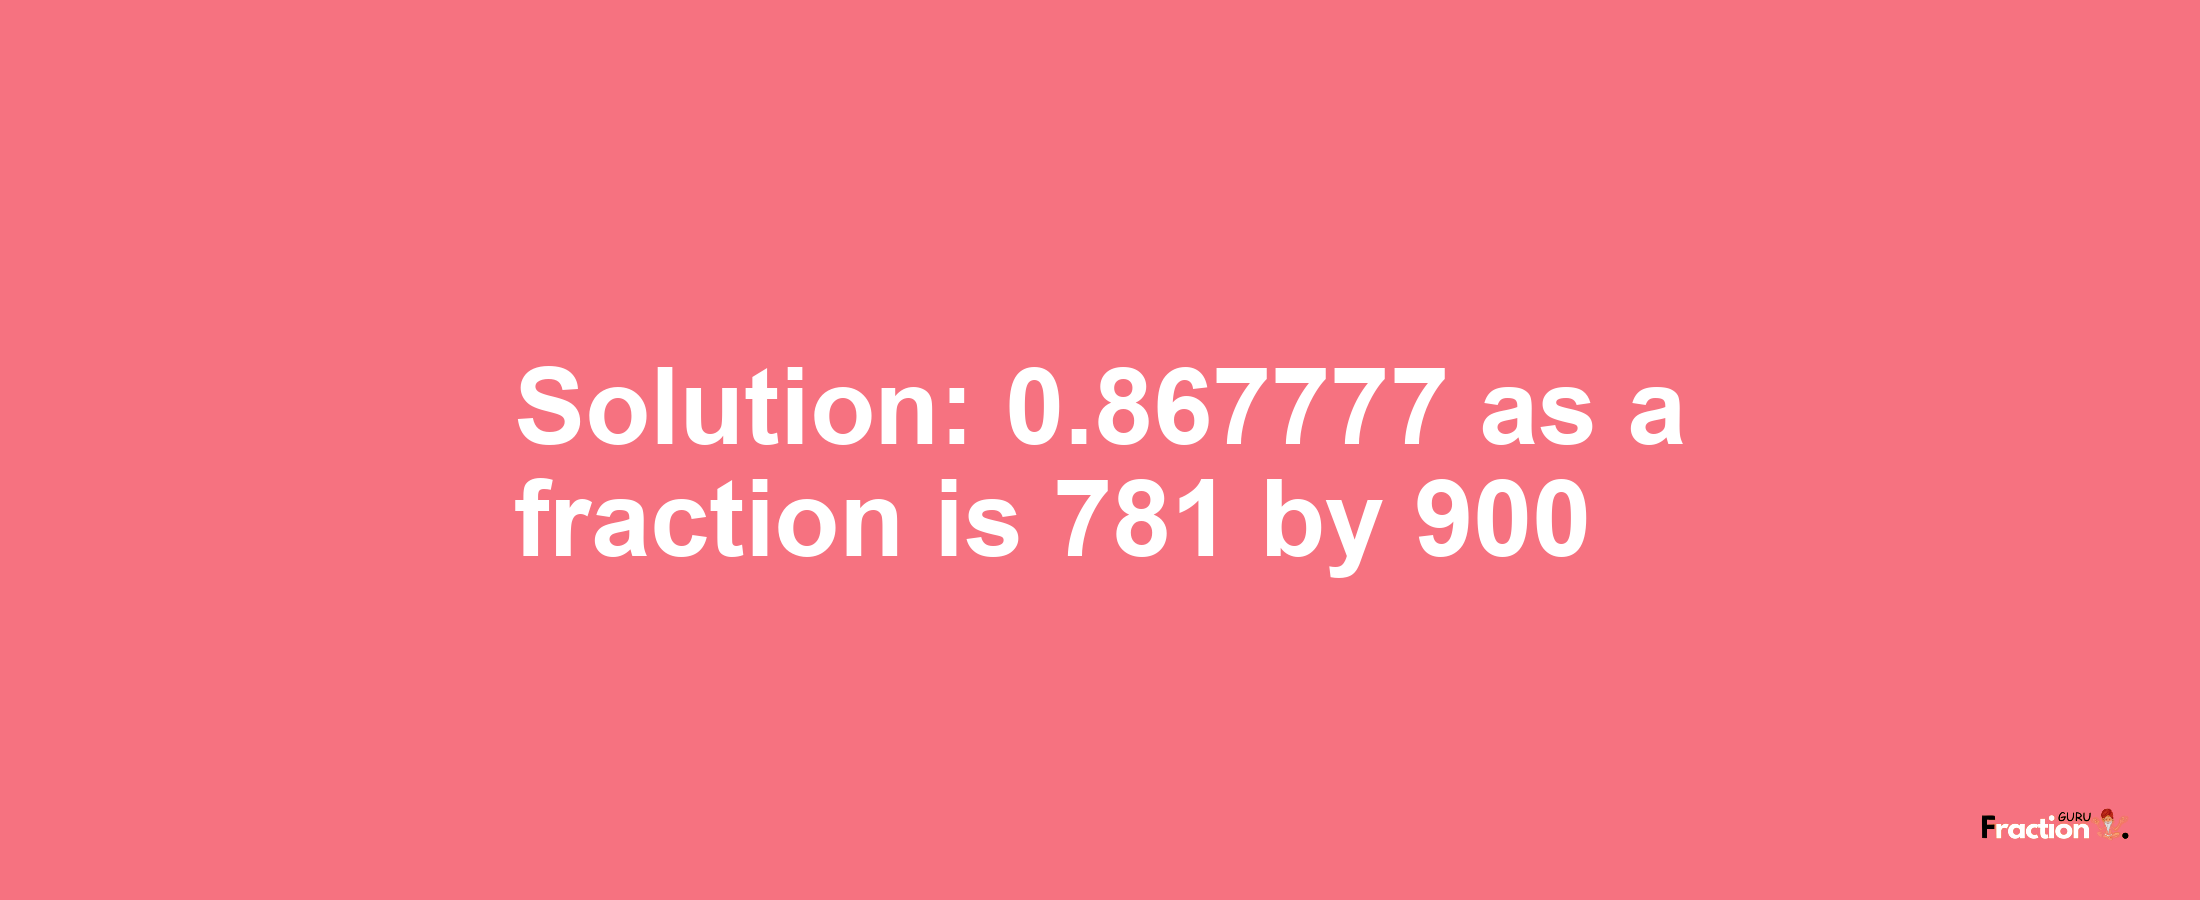 Solution:0.867777 as a fraction is 781/900